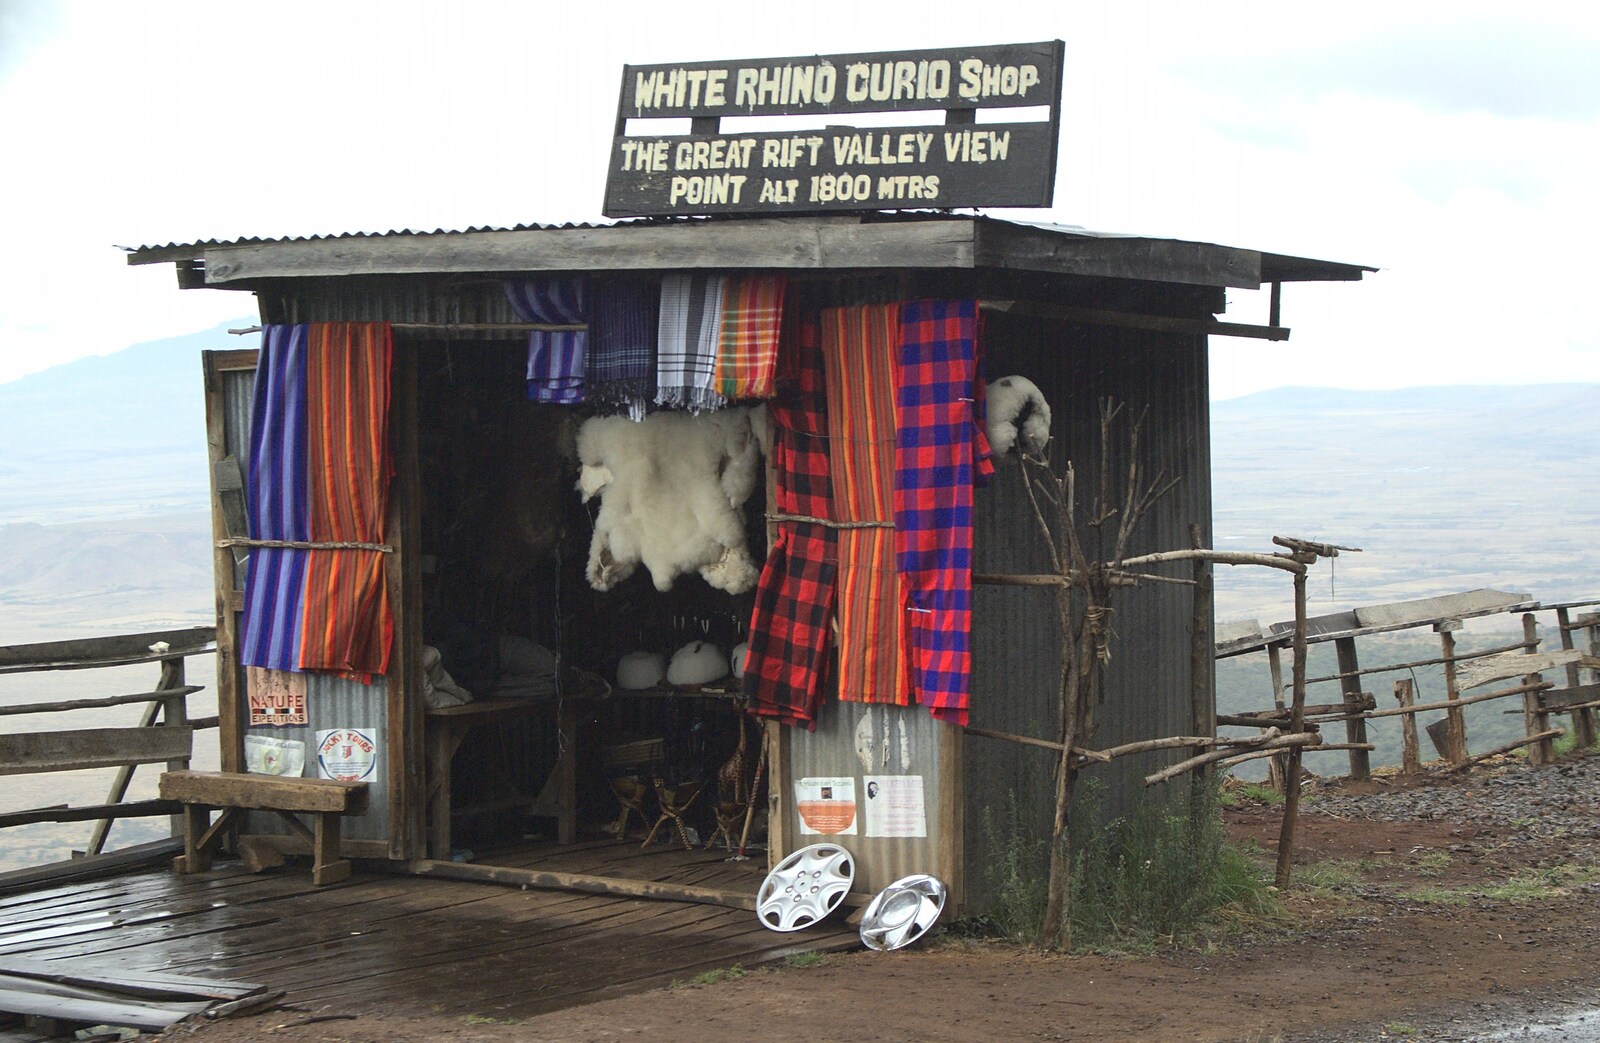 The White Rhino Curio shop on the top of a cliff from Nairobi and the Road to Maasai Mara, Kenya, Africa - 1st November 2010